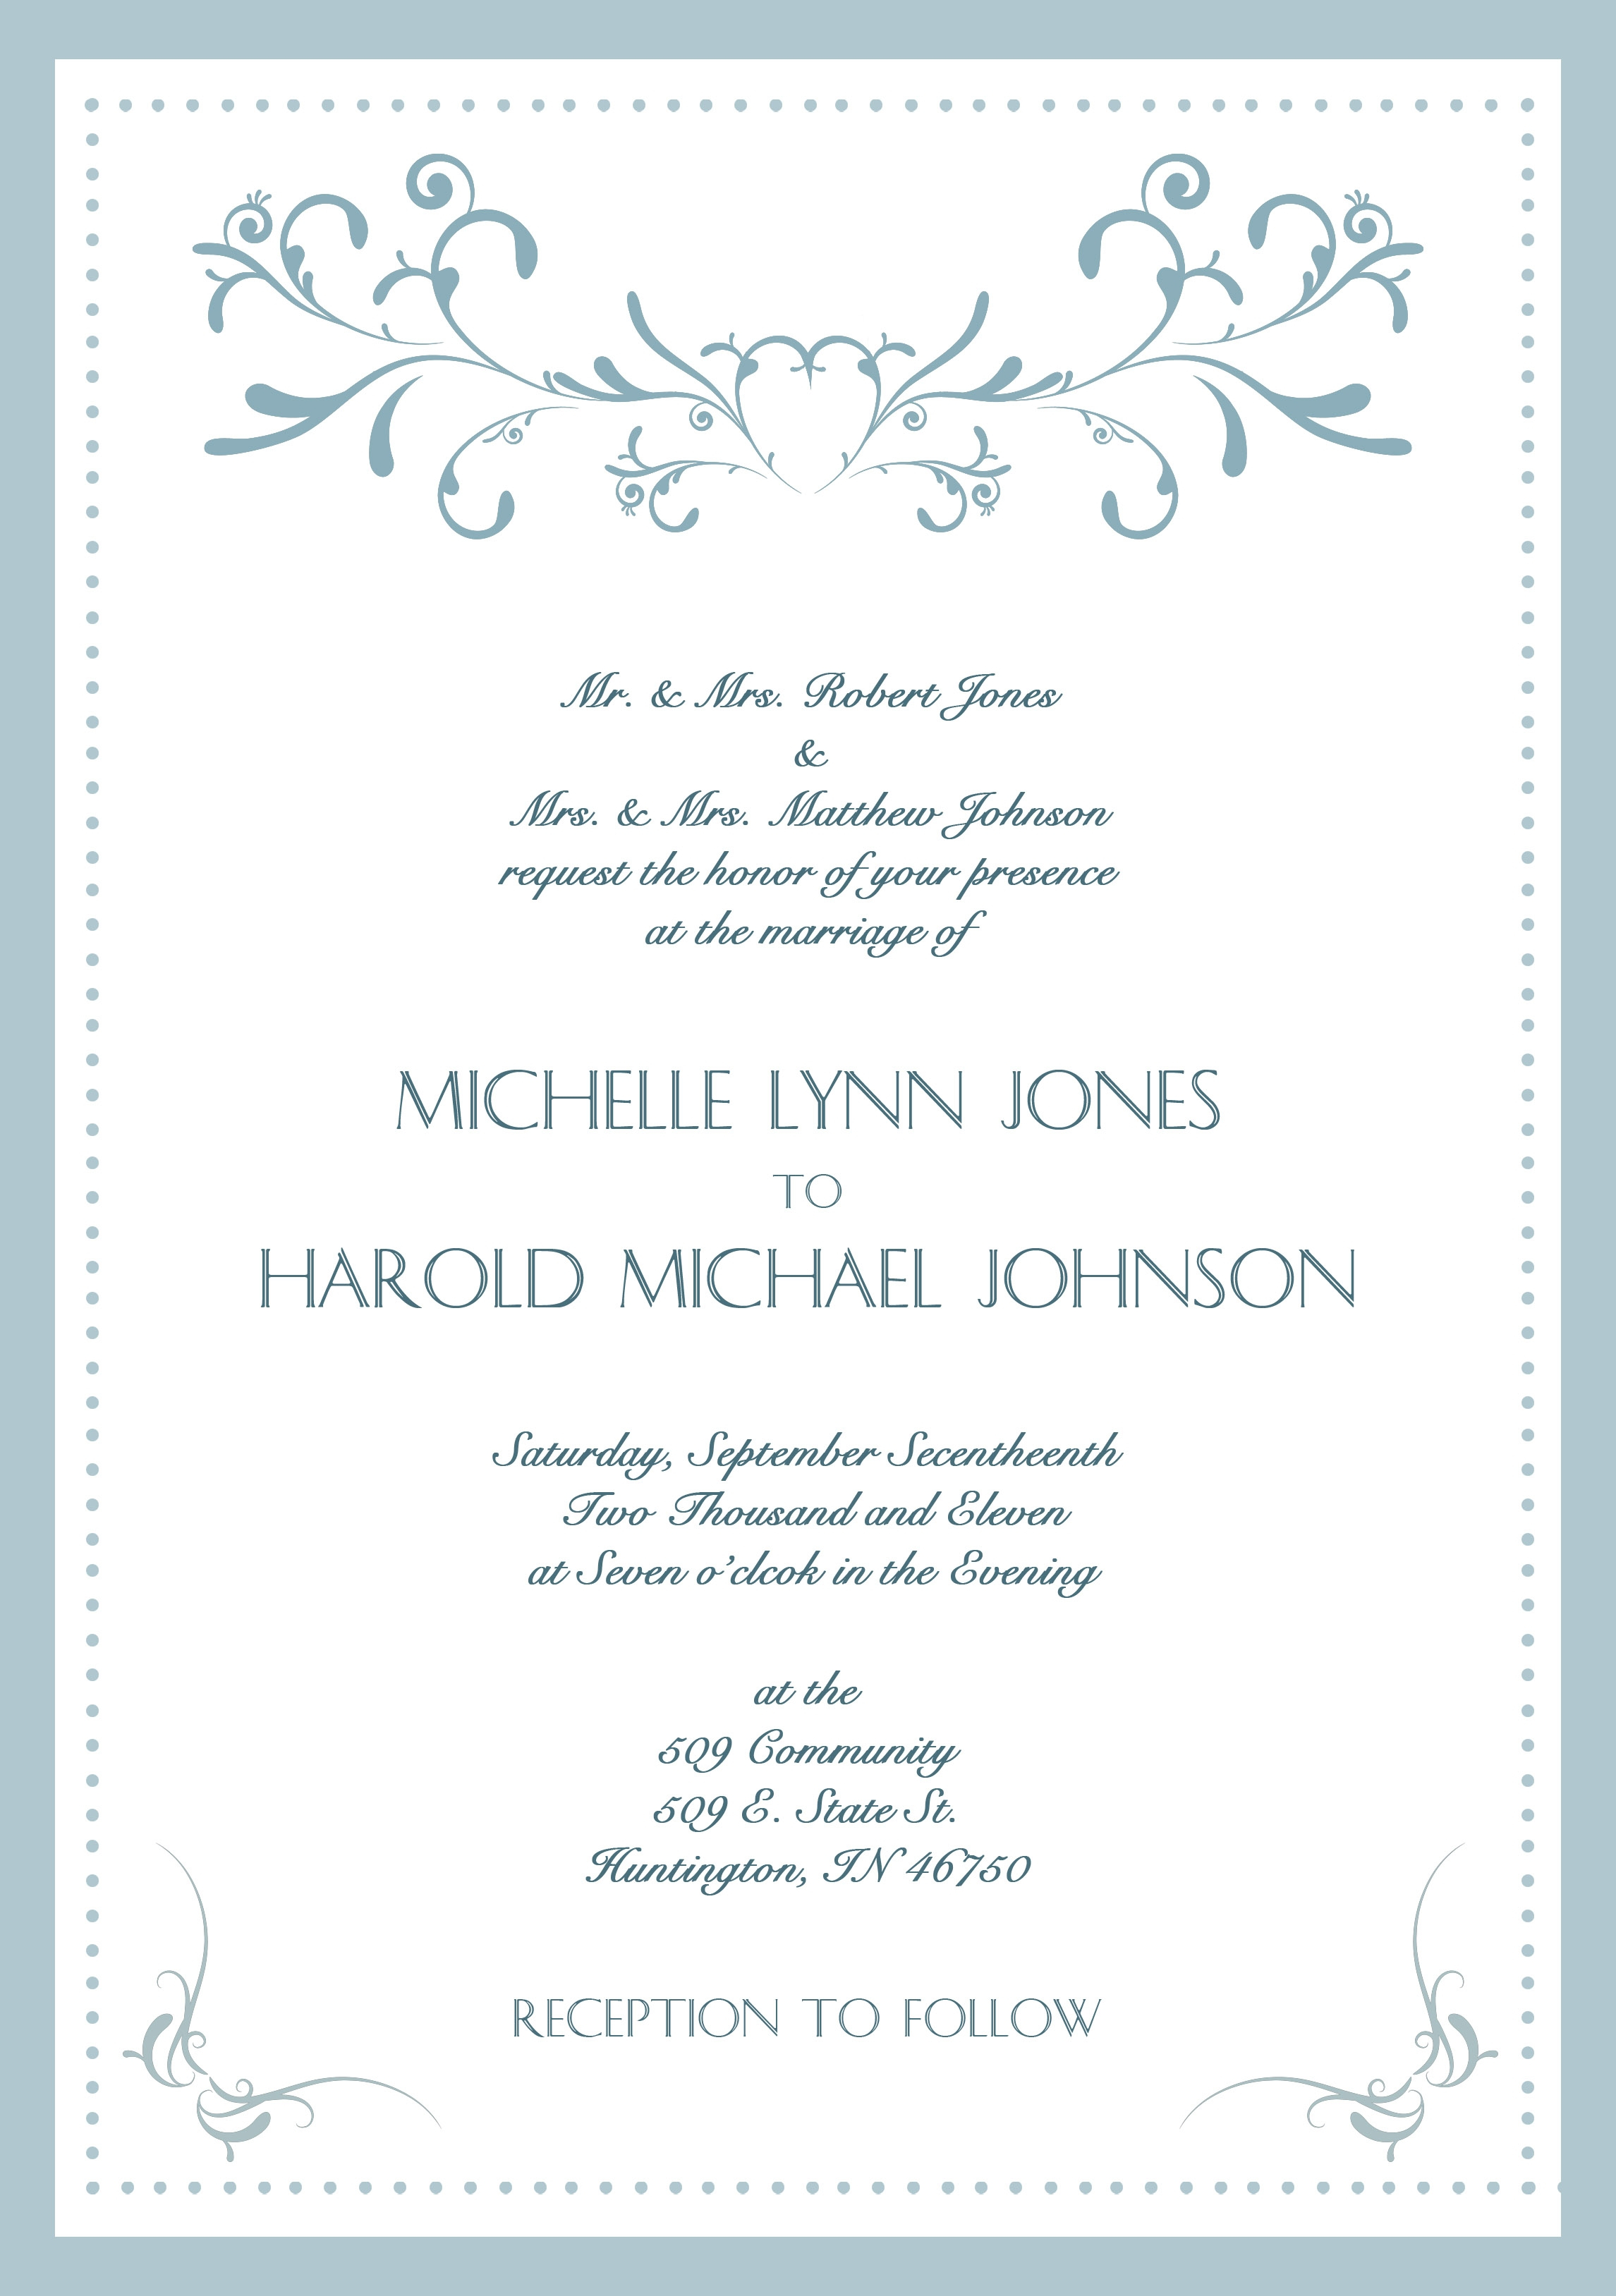 Formal Invitation Writing Format Invitation Templates Free within proportions 2291 X 3256